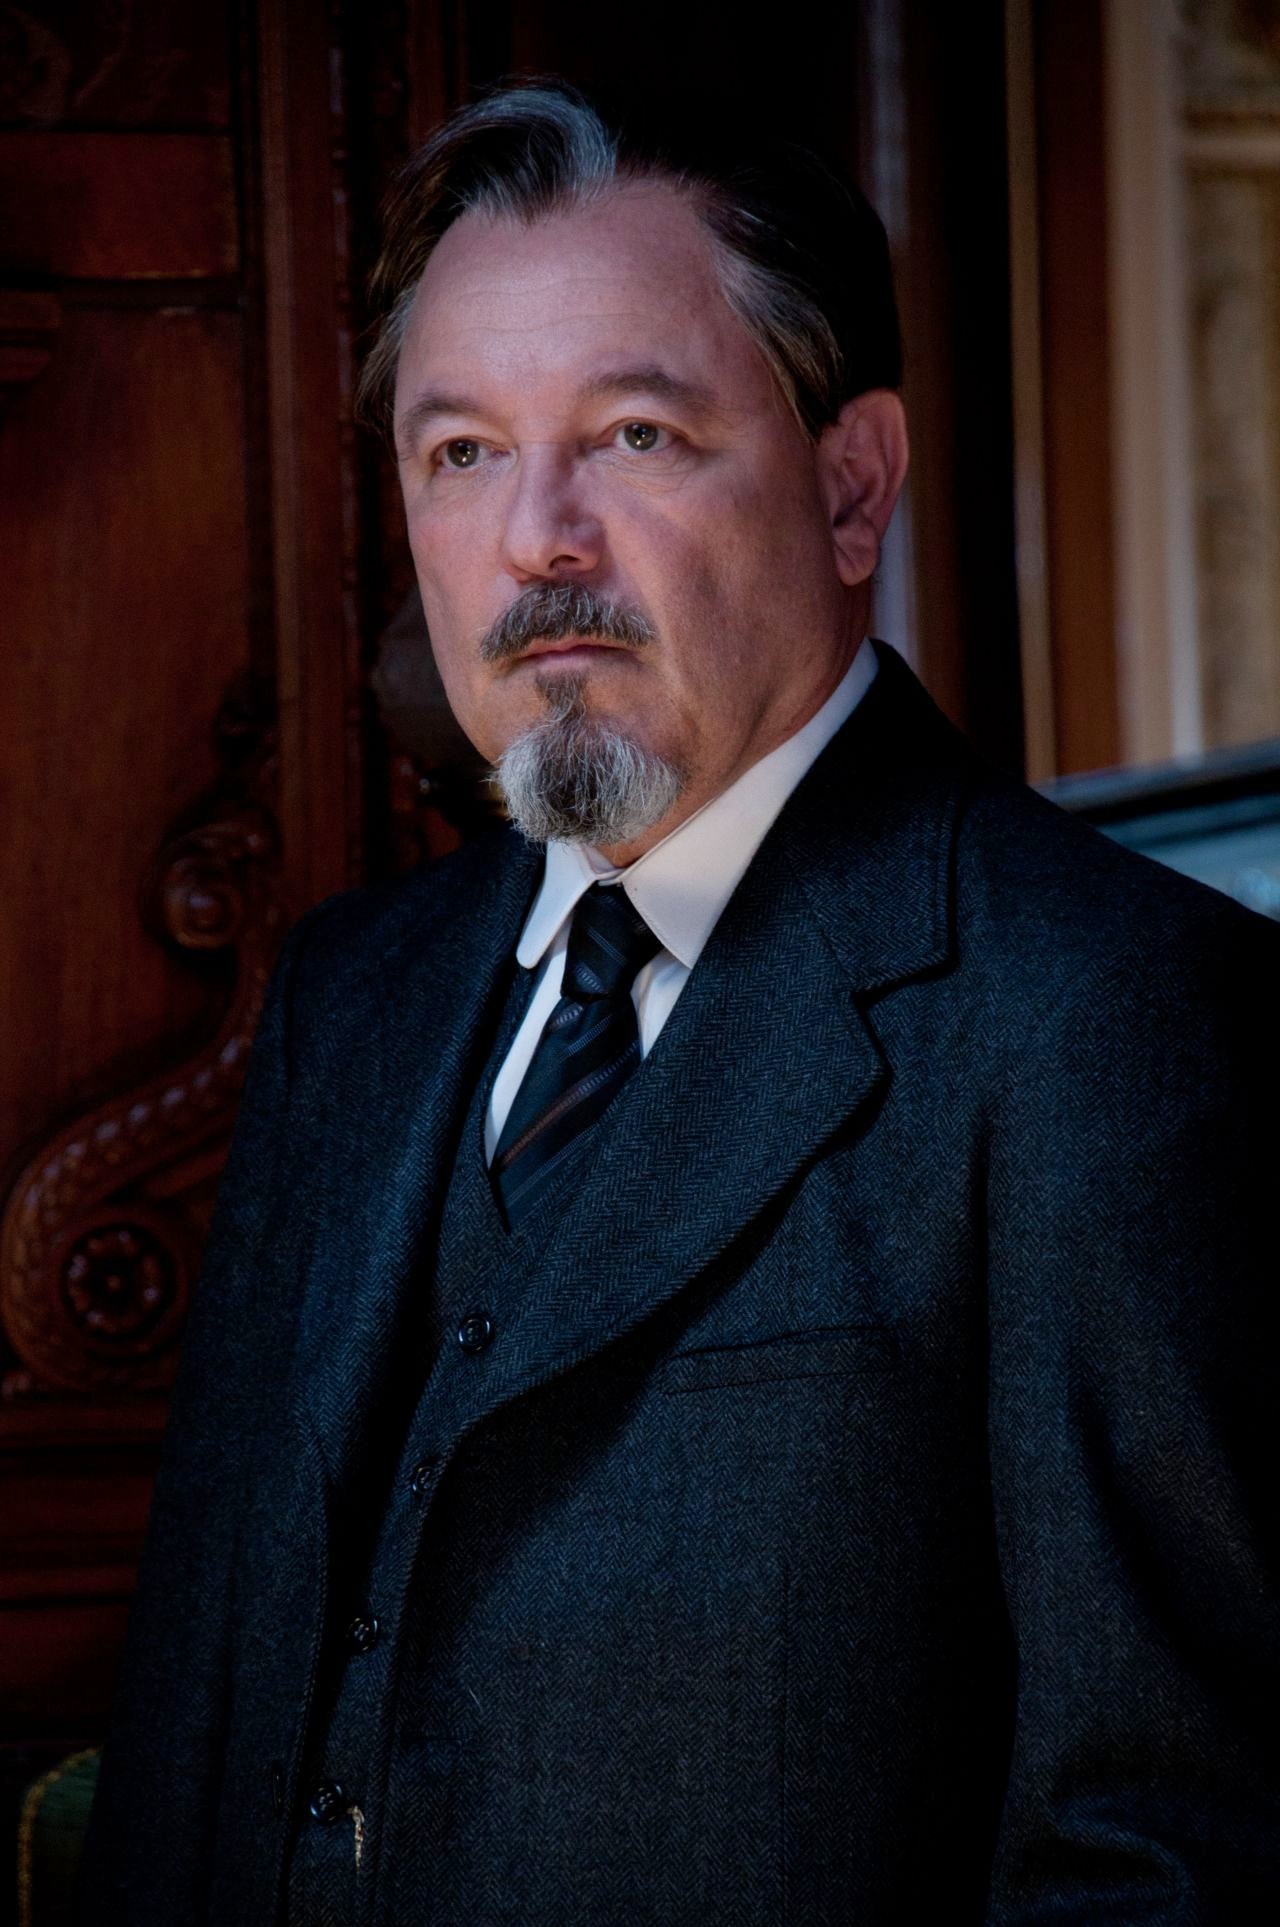 Ruben Blades stars as President Plutarco Elias Calles in ARC Entertainment's For Greater Glory (2012). Photo credit by Hana Matsumoto.